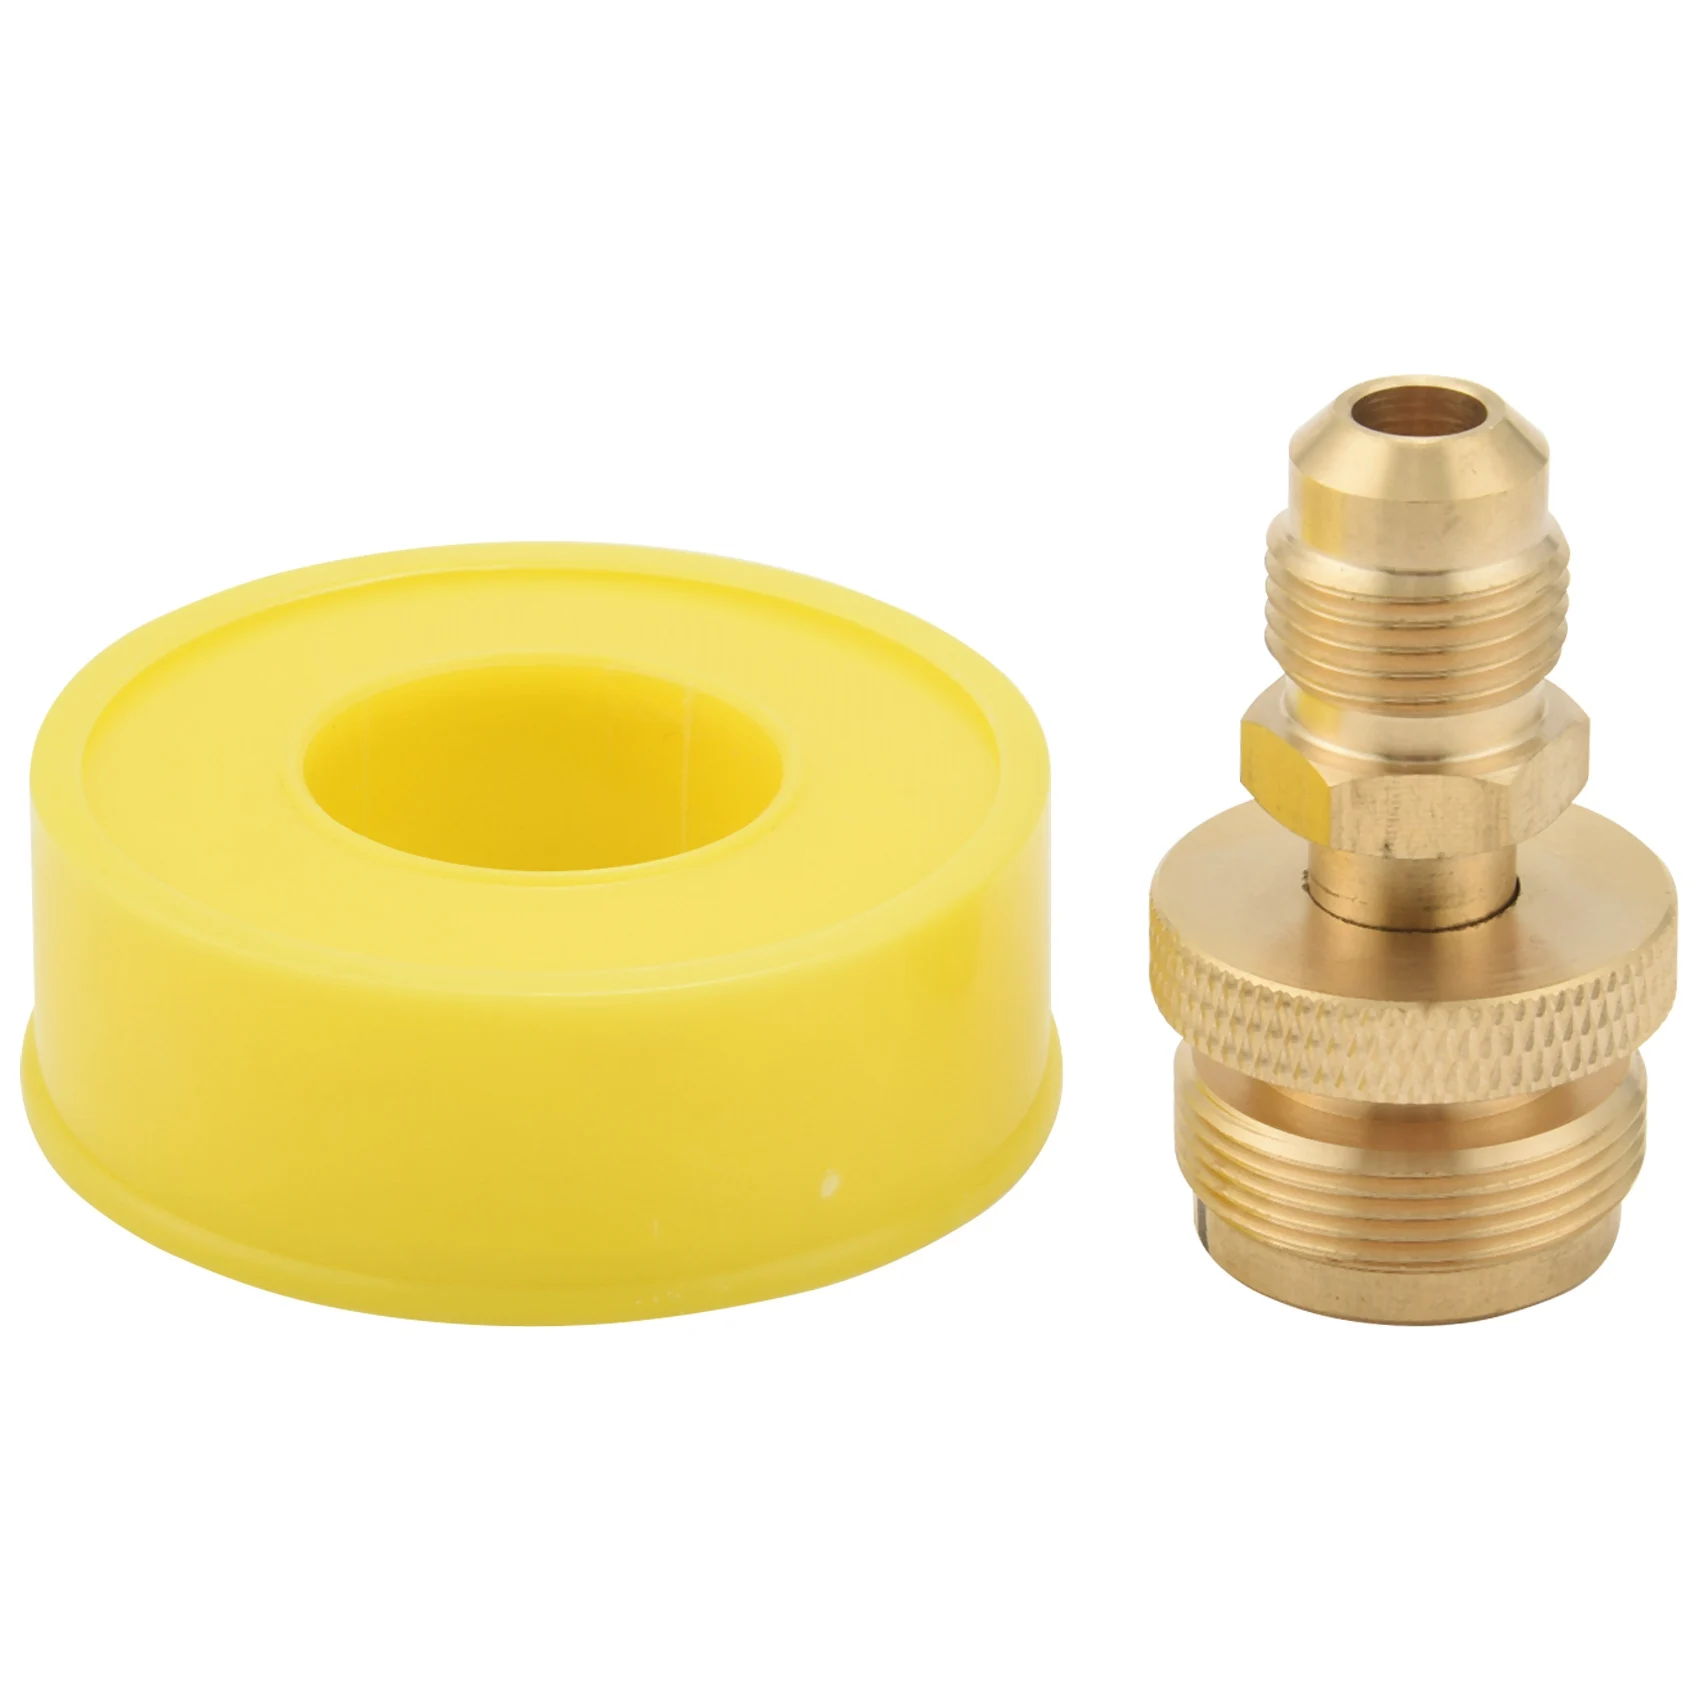 

1LB Portable Propane Regulator Adapter, 1In-20 Male Throwaway Cylinder Thread To 3/8In Male Flare (5/8In-18UNF) Fitting